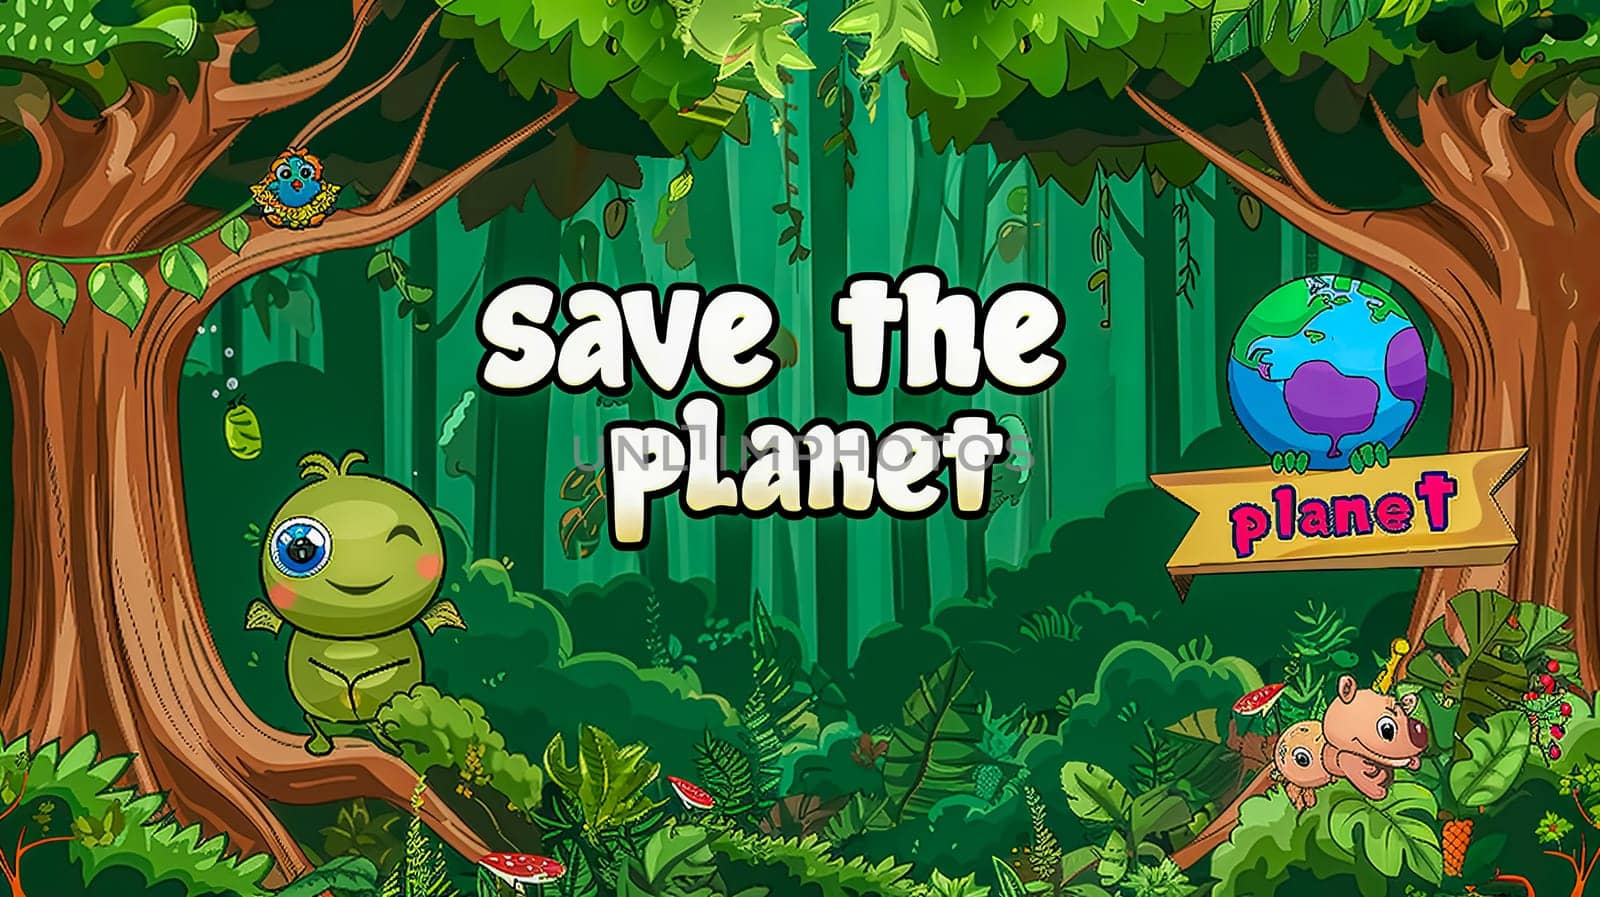 Save the planet - cartoon forest environment awareness by Edophoto